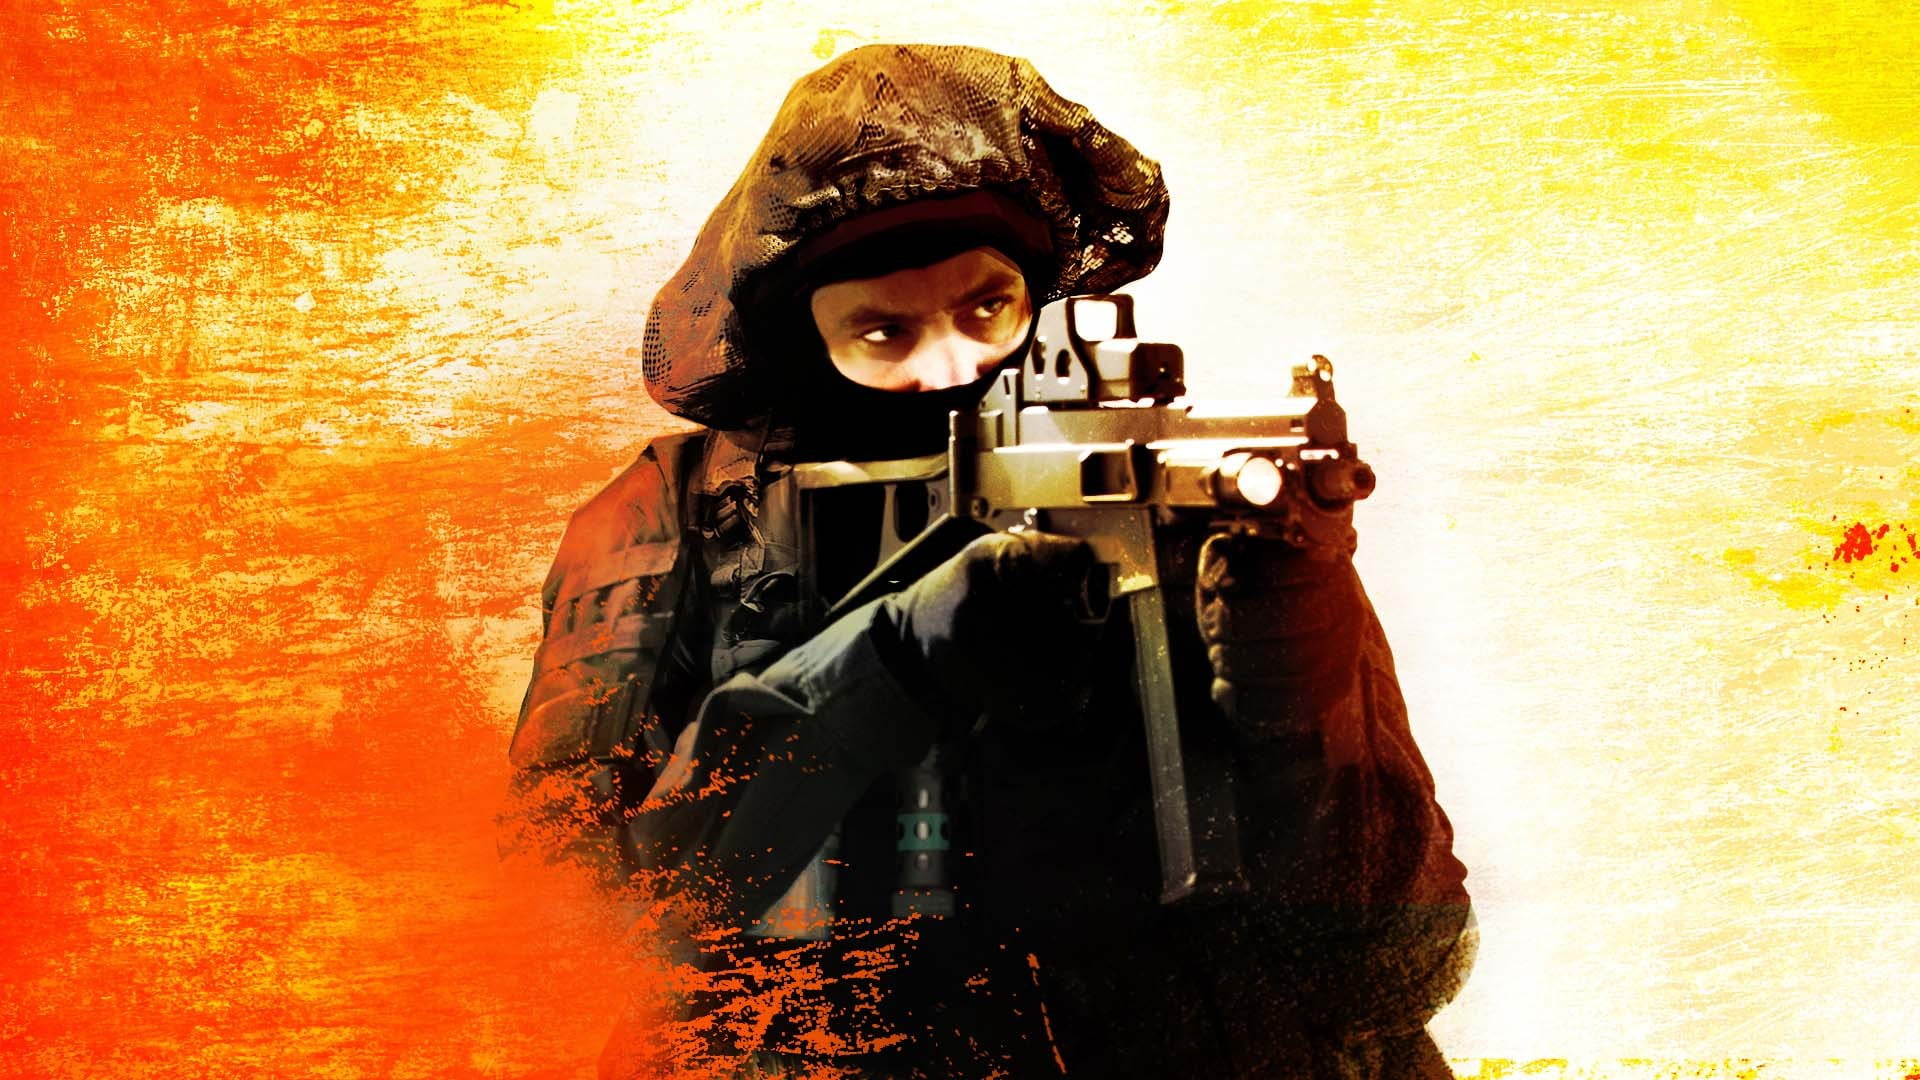 soldier portrait painting, Counter-Strike: Global Offensive, orange background